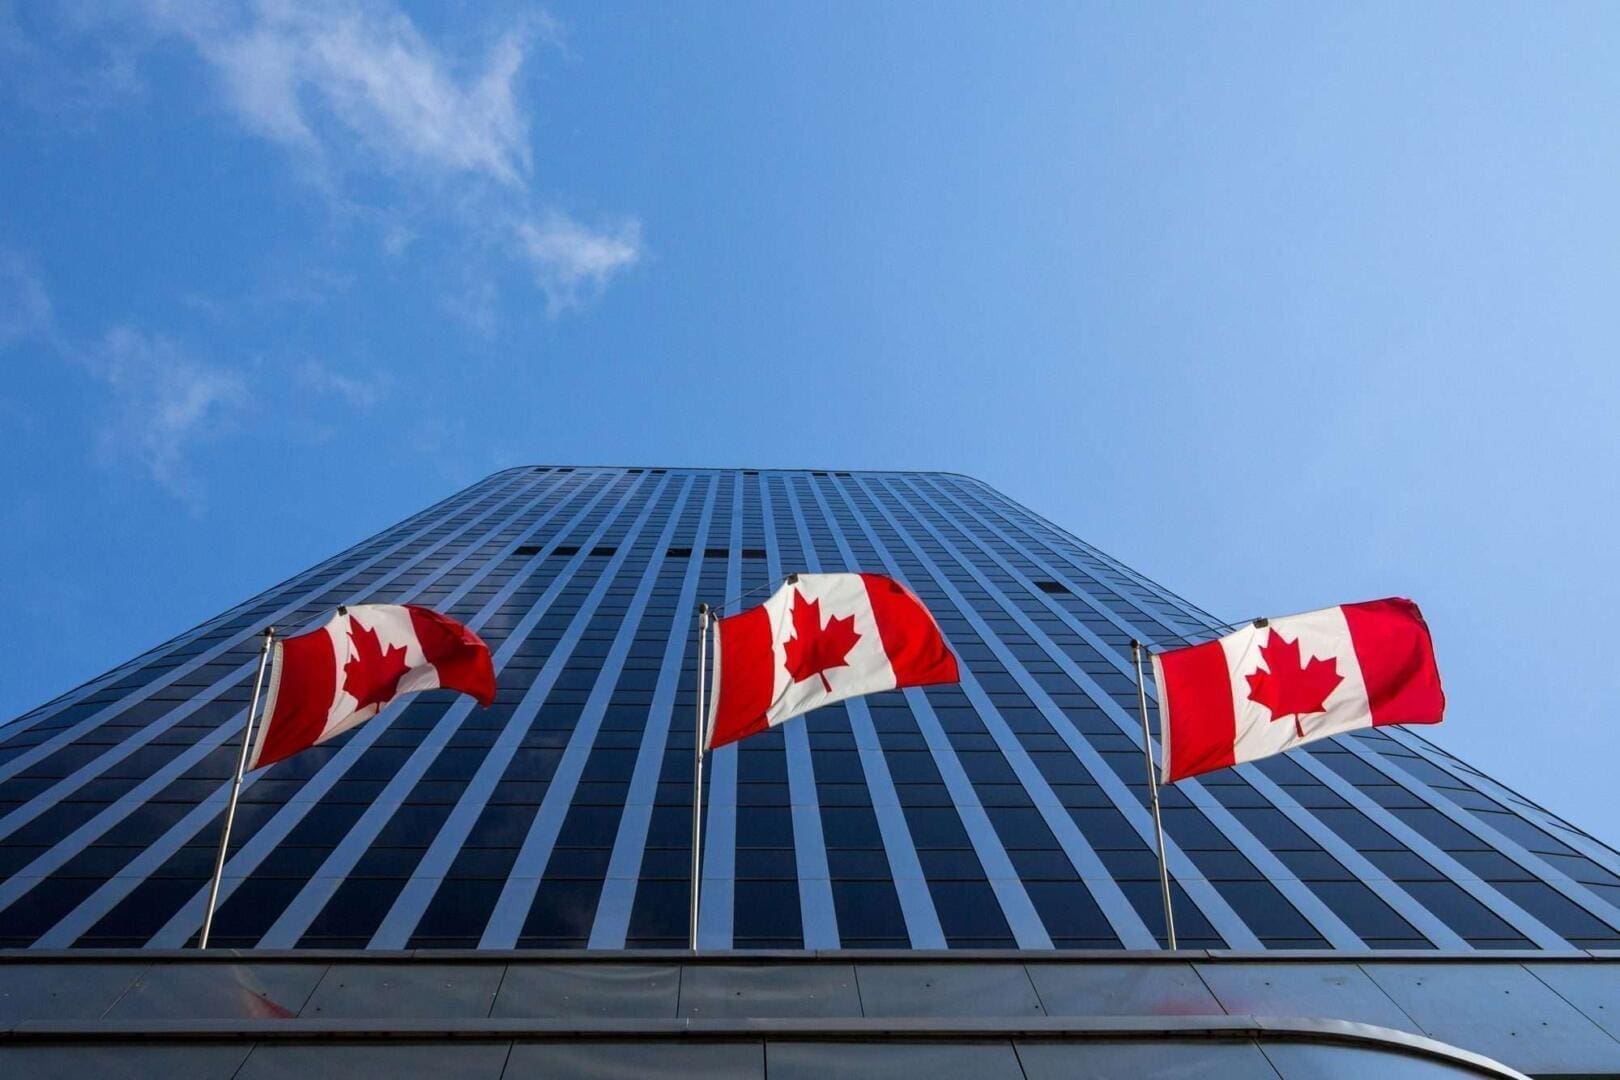 Picture of the canadian flag taken in front of a cold and blue business building in the CDB of Ottaawa. Ottawa is the capital city of Canada, and a major hub for economy, politics and business in America.